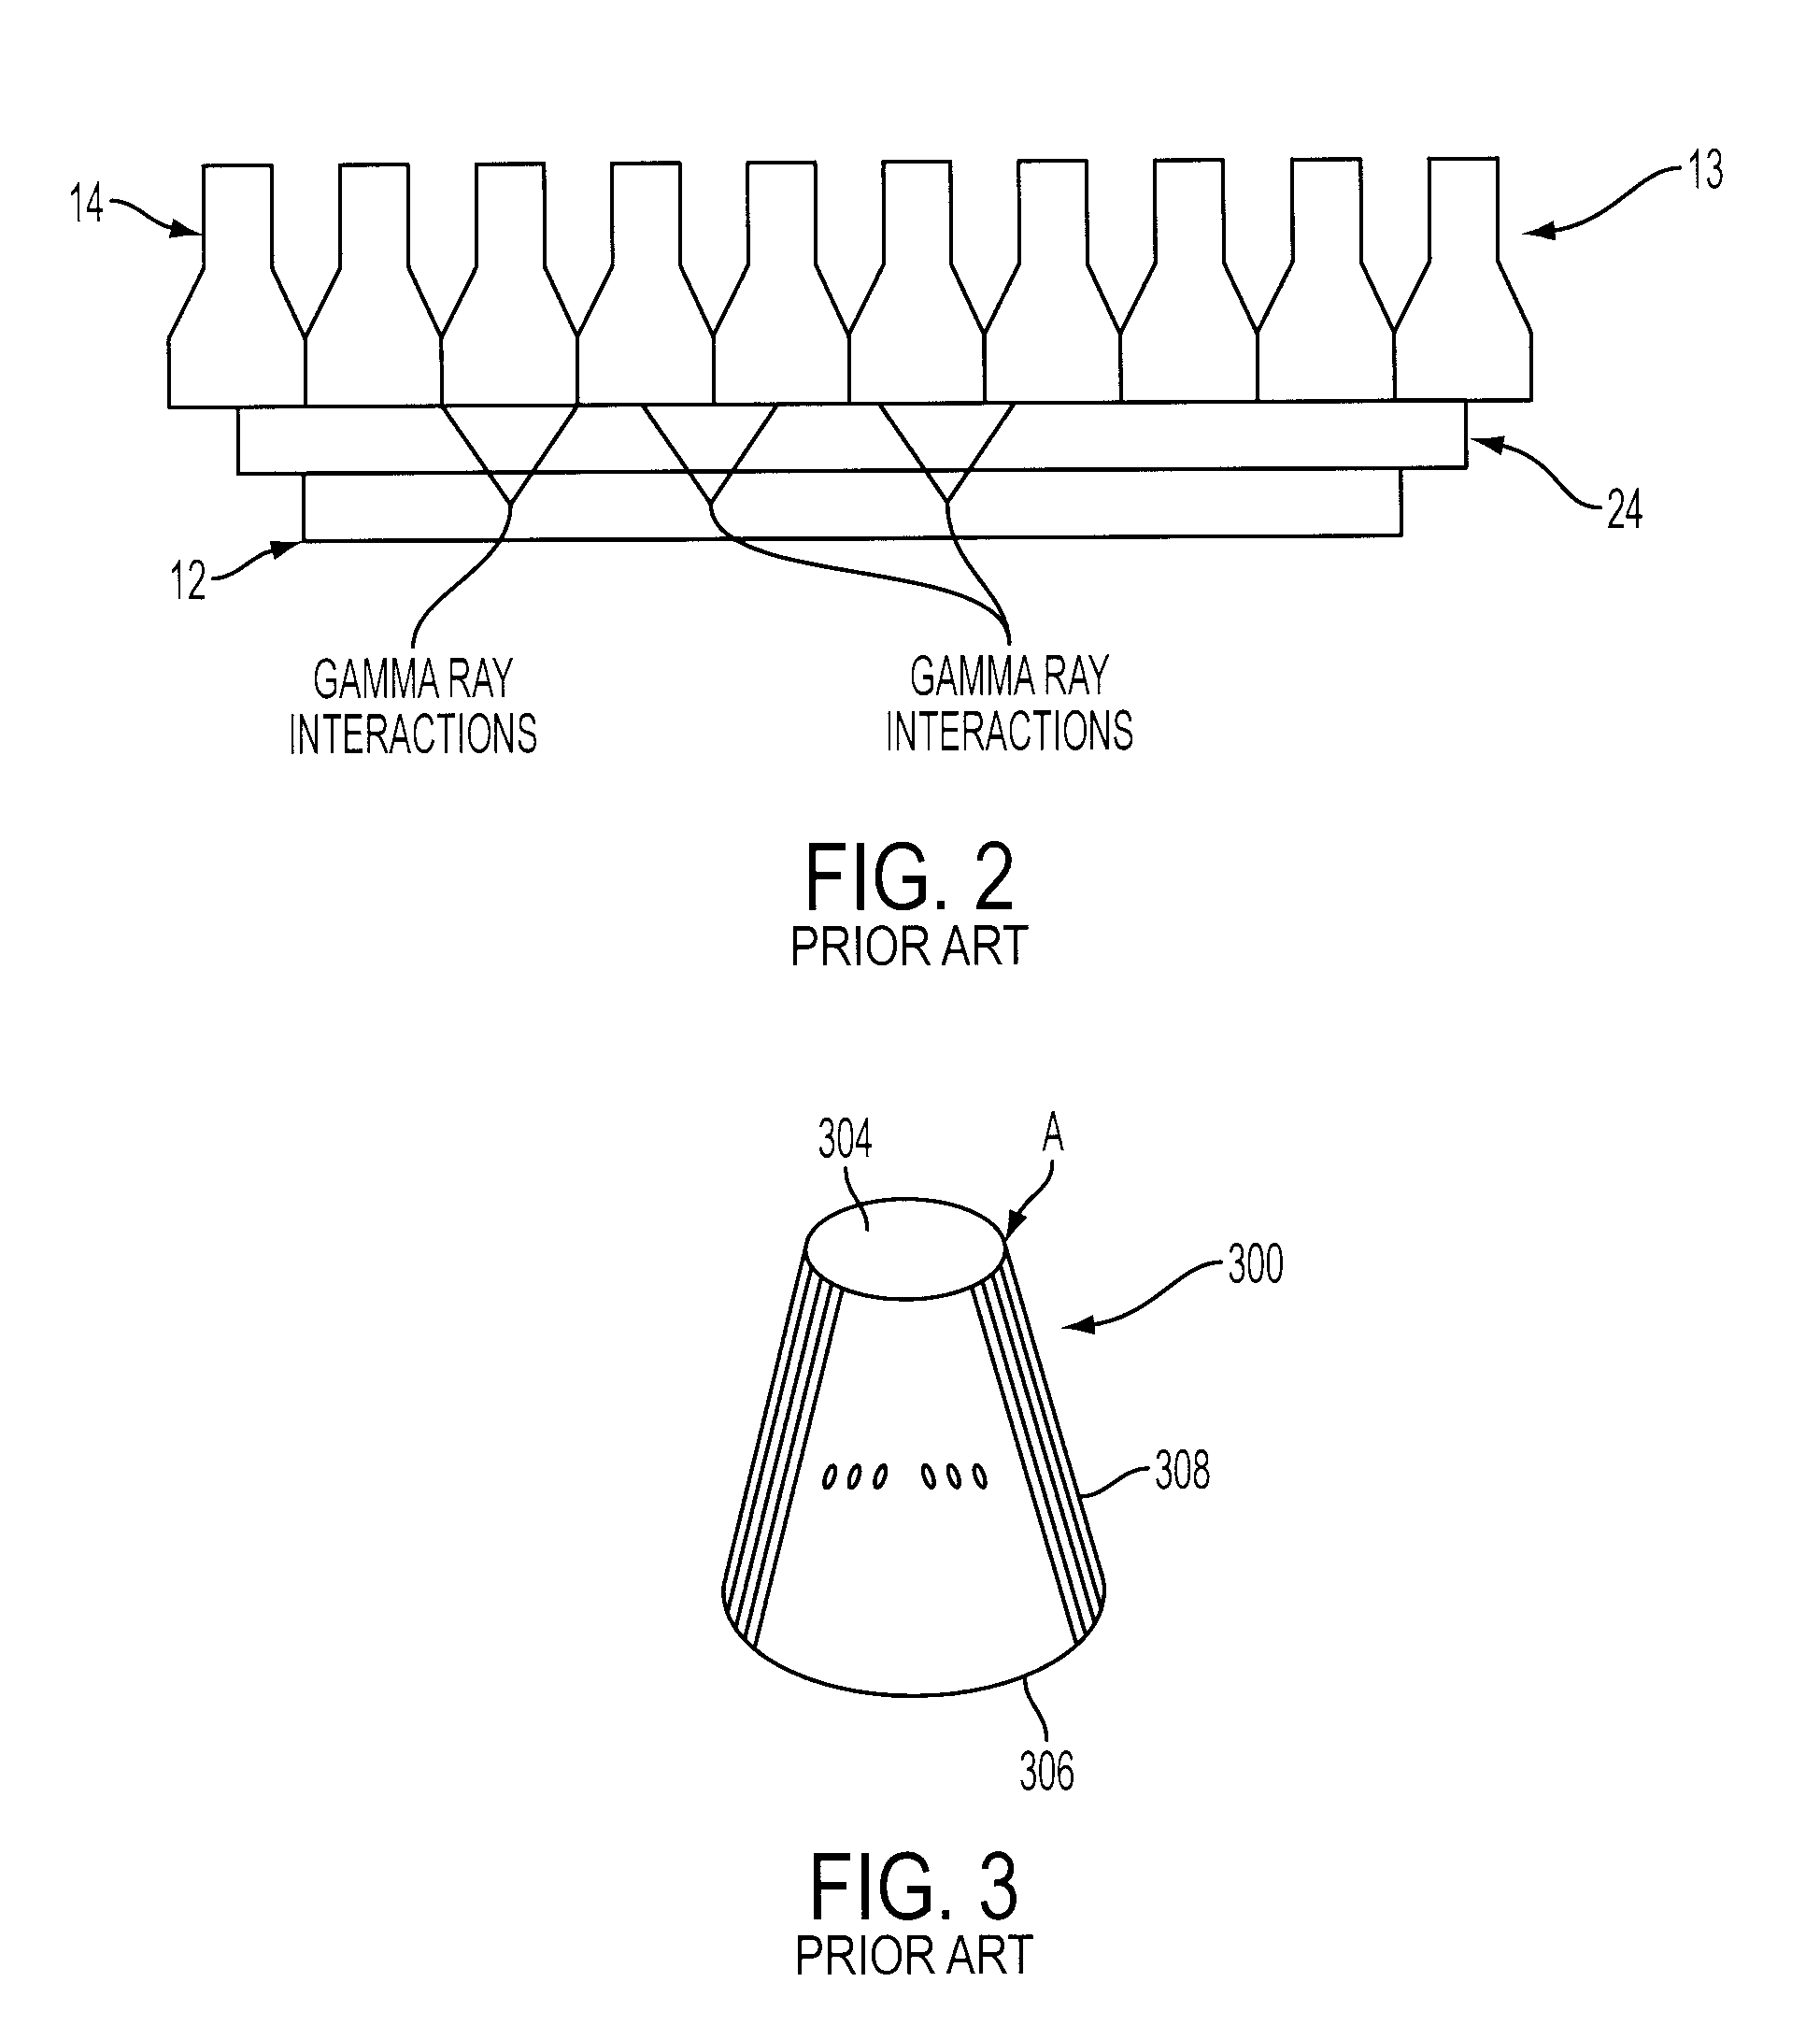 Light guide having a tapered geometrical configuration for improving light collection in a radiation detector